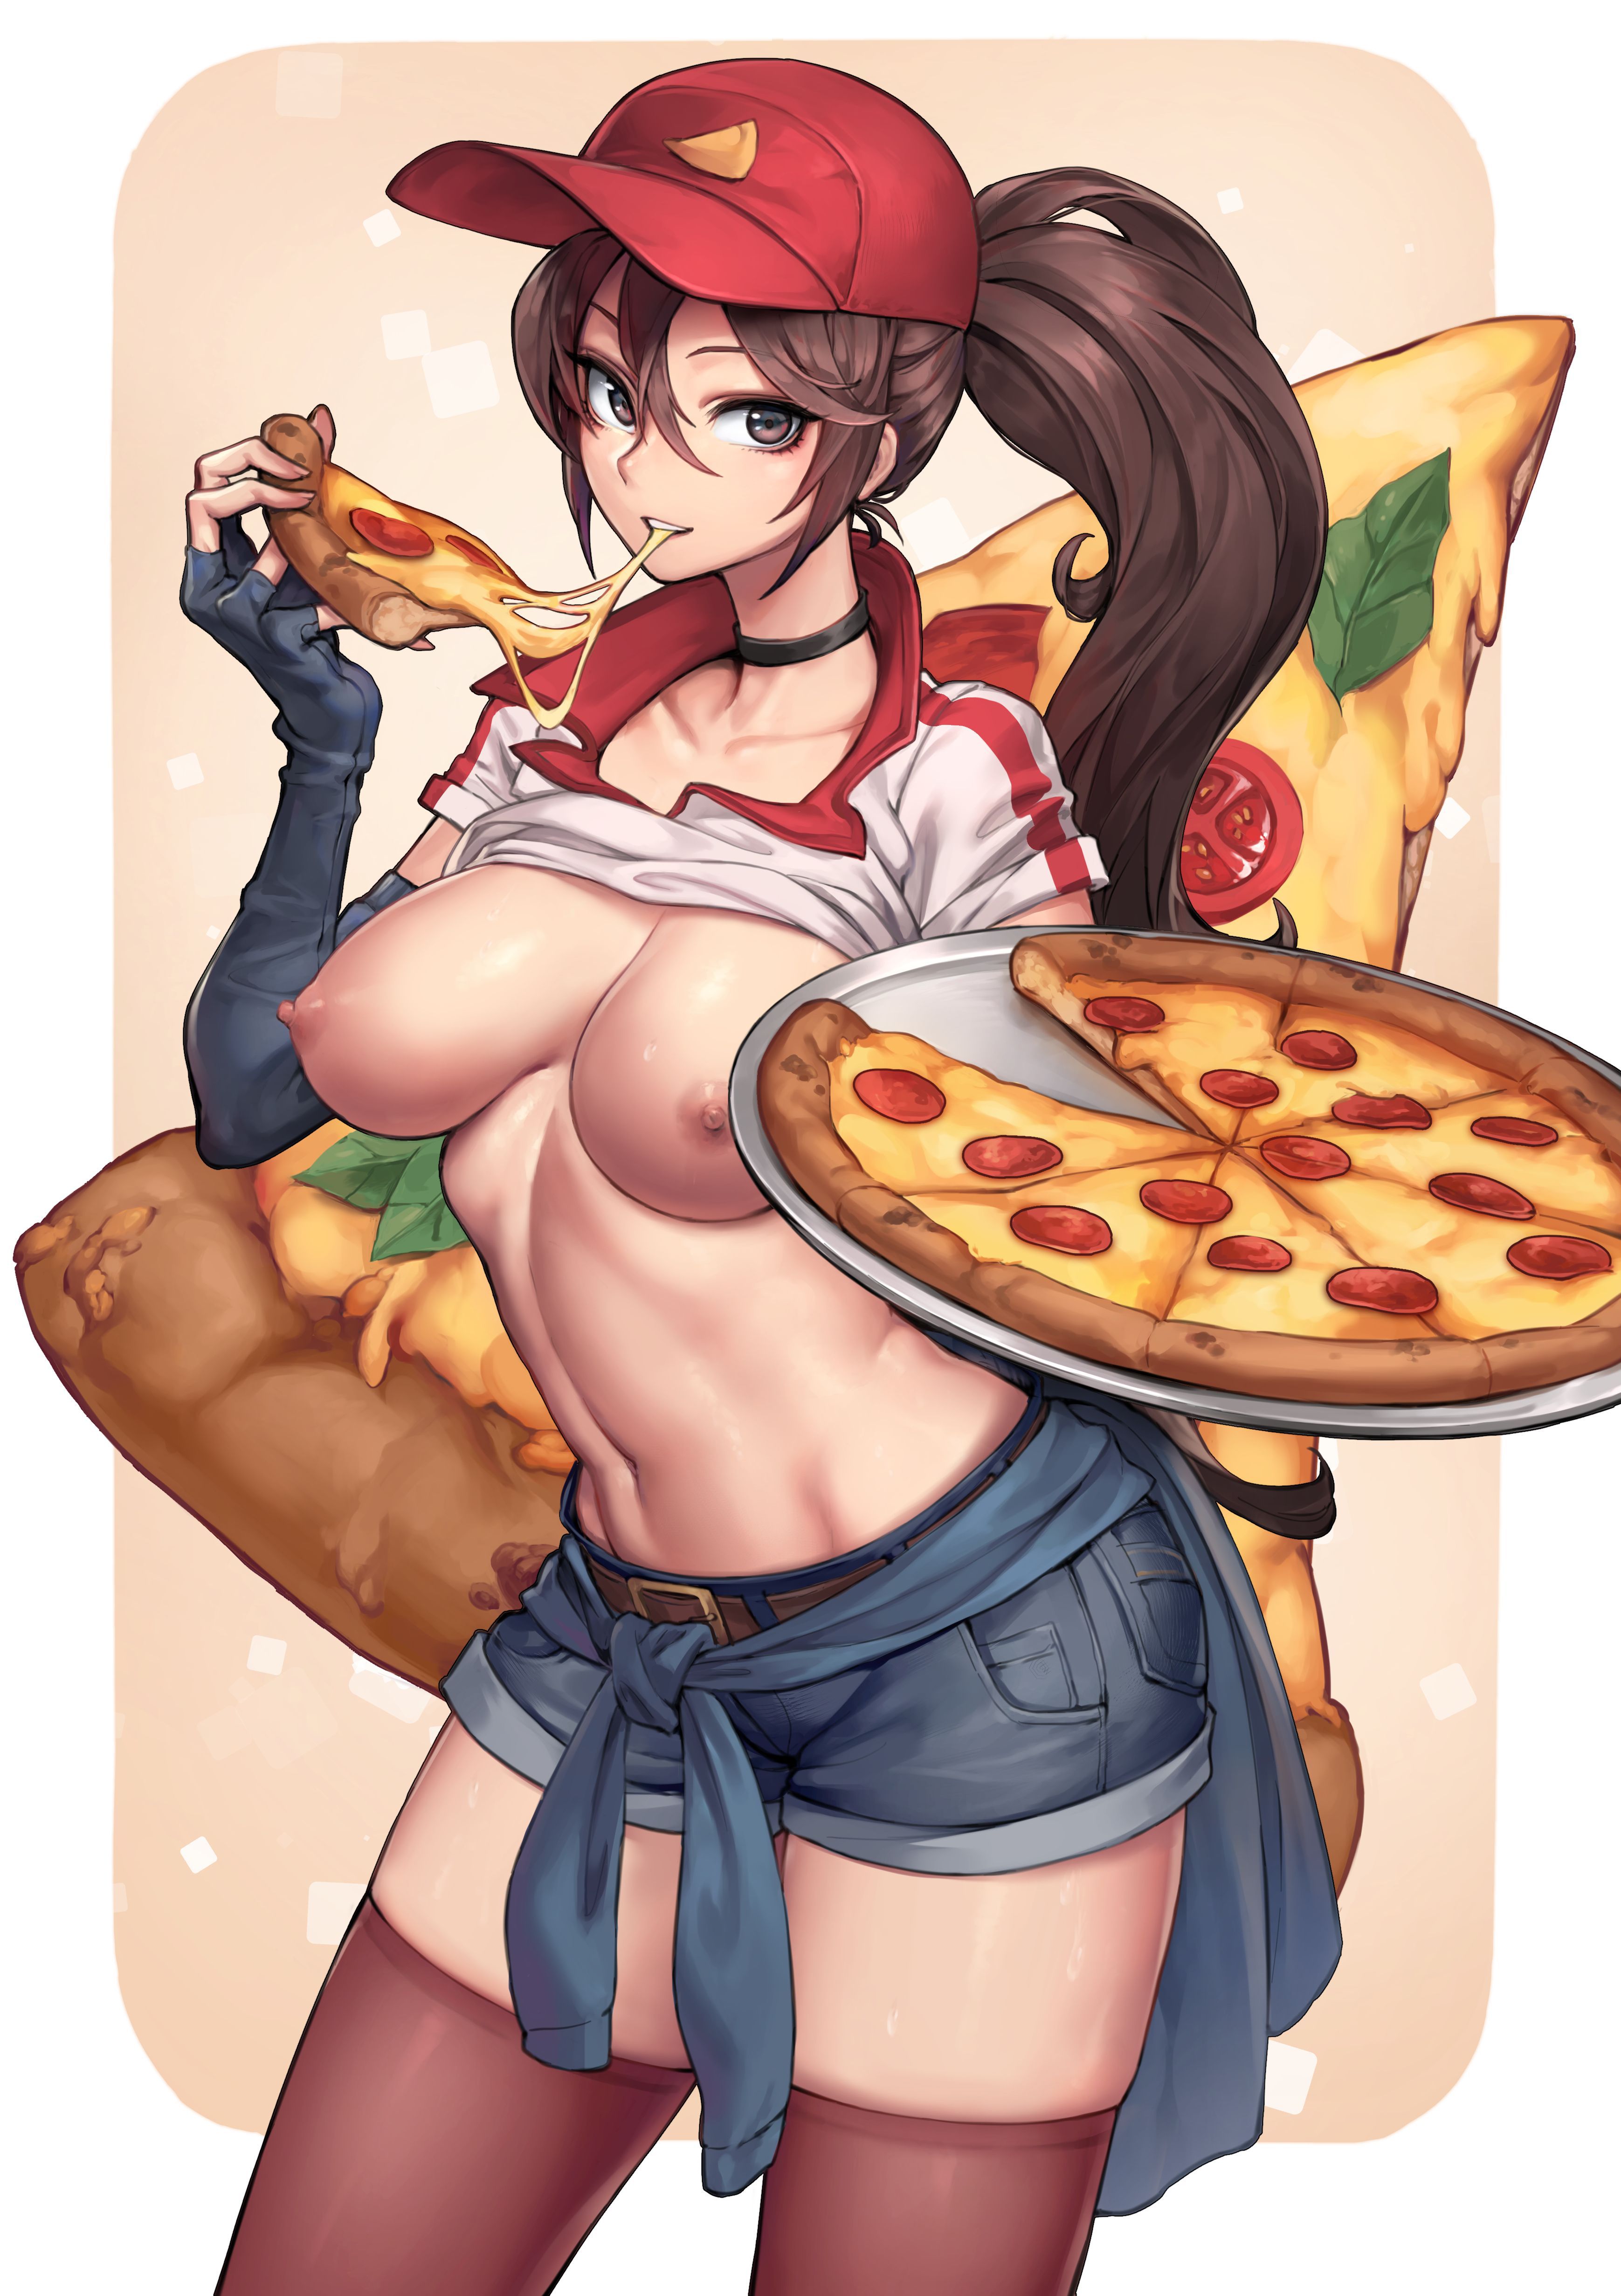 __pizza_delivery_sivir_and_sivir_league_of_legends_drawn_by_oopartz_yang__19b0dfb490b3aff37f0a748c9304d340